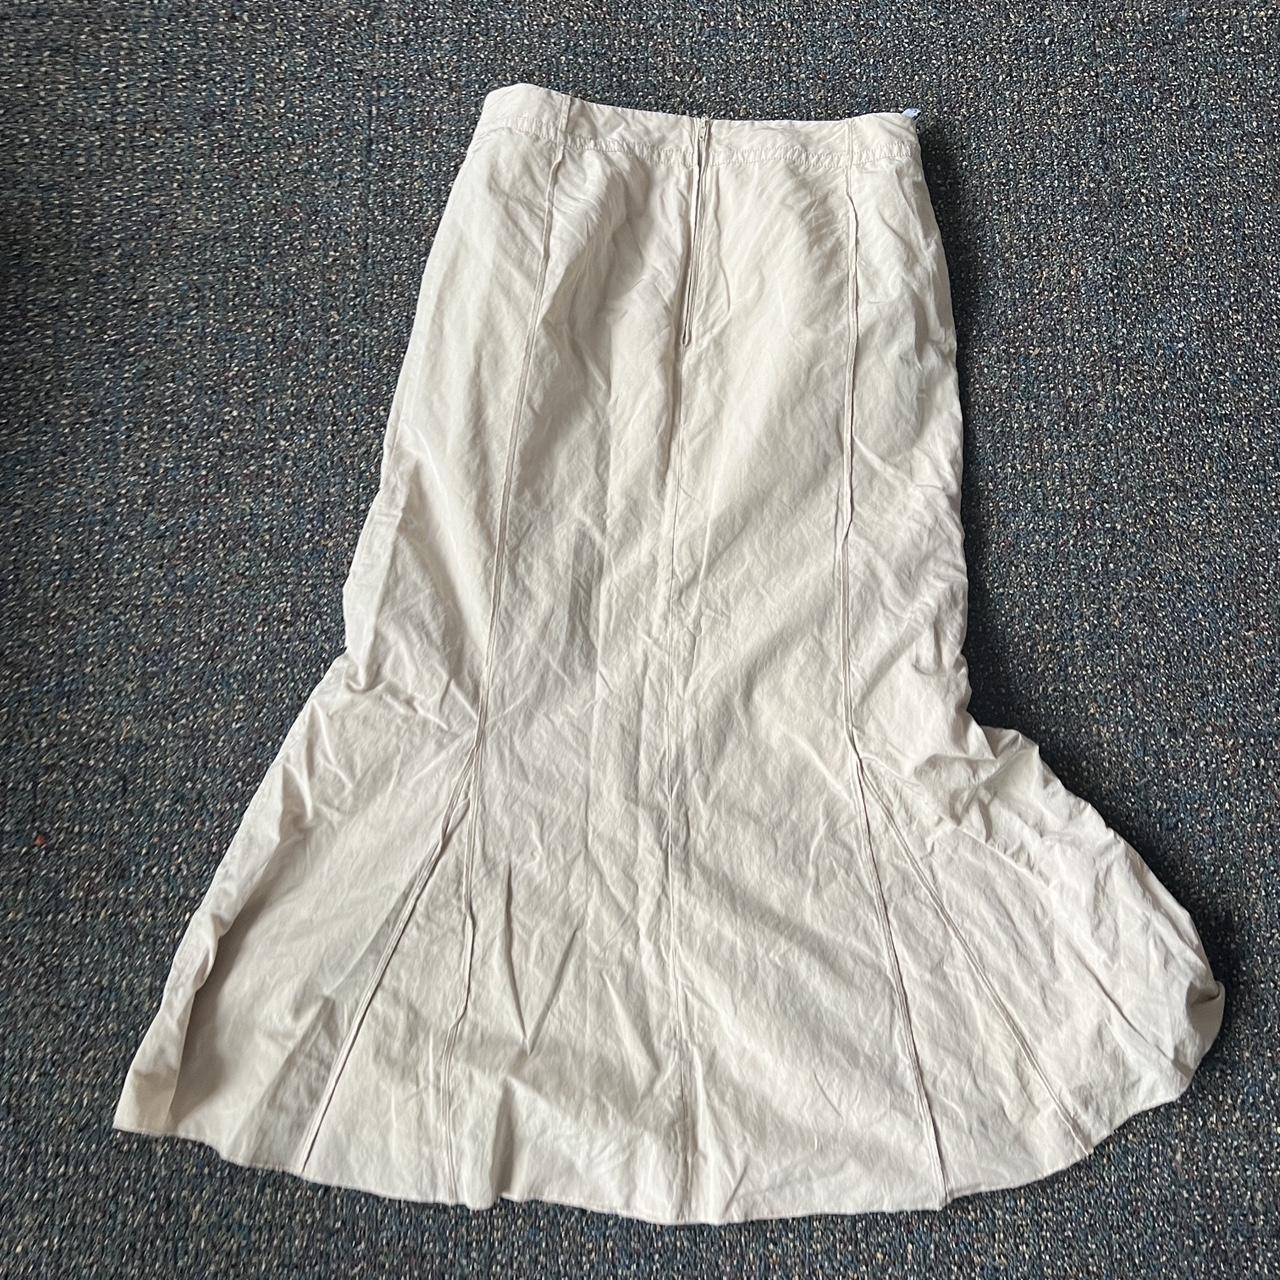 Urban Outfitters Women's Cream and Tan Skirt | Depop